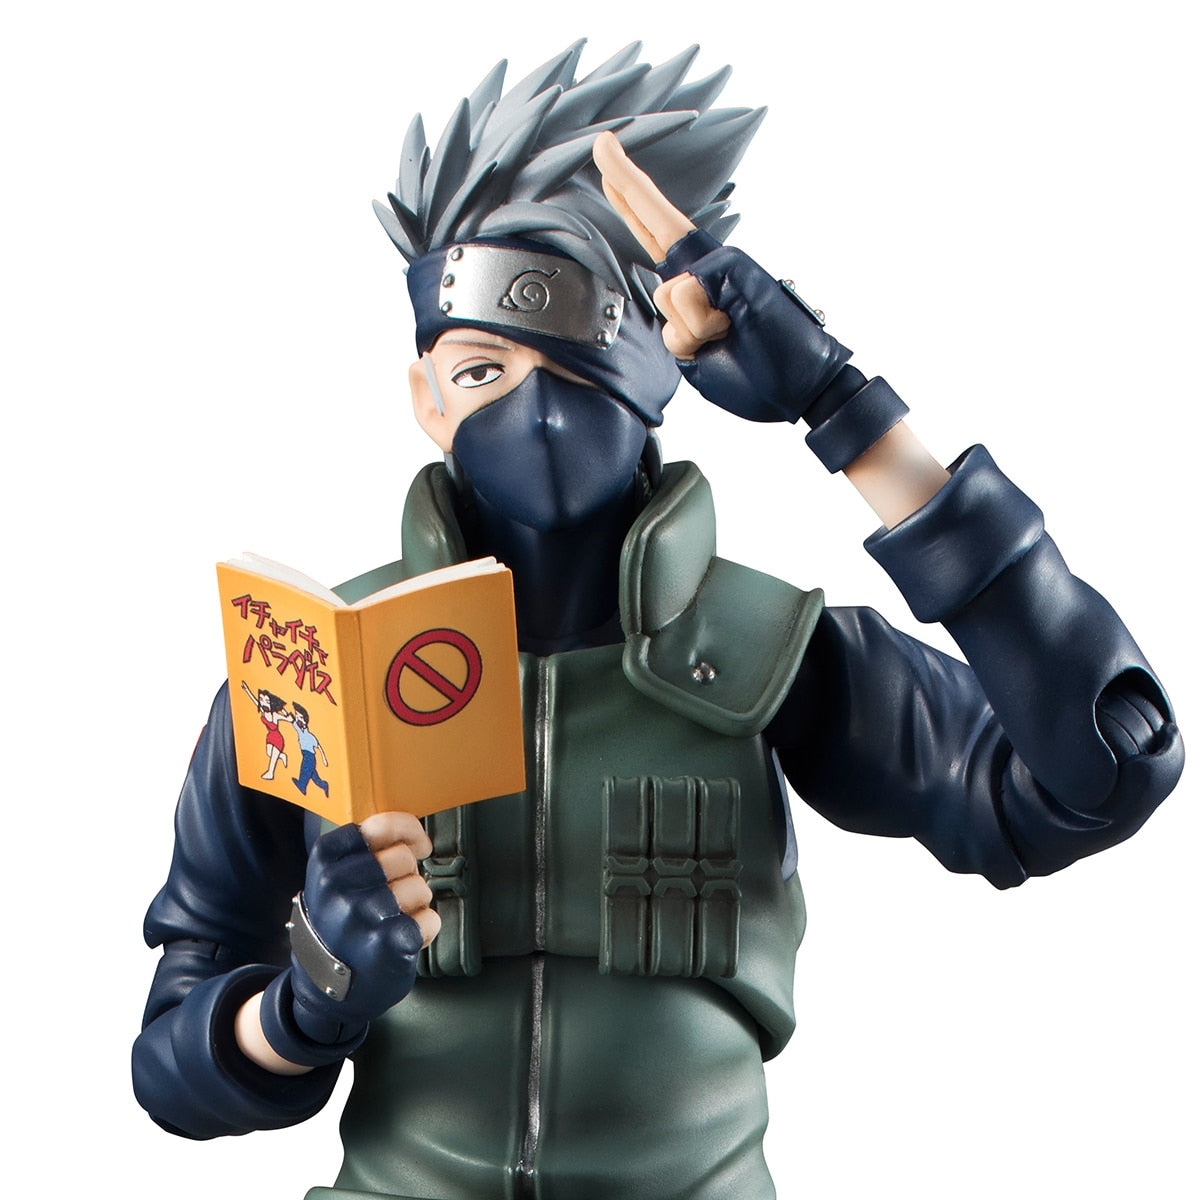 See Kakashi's figurine, ready in action with his iconic Lightning Blade. | If you are looking for more Naruto Merch, We have it all! | Check out all our Anime Merch now!